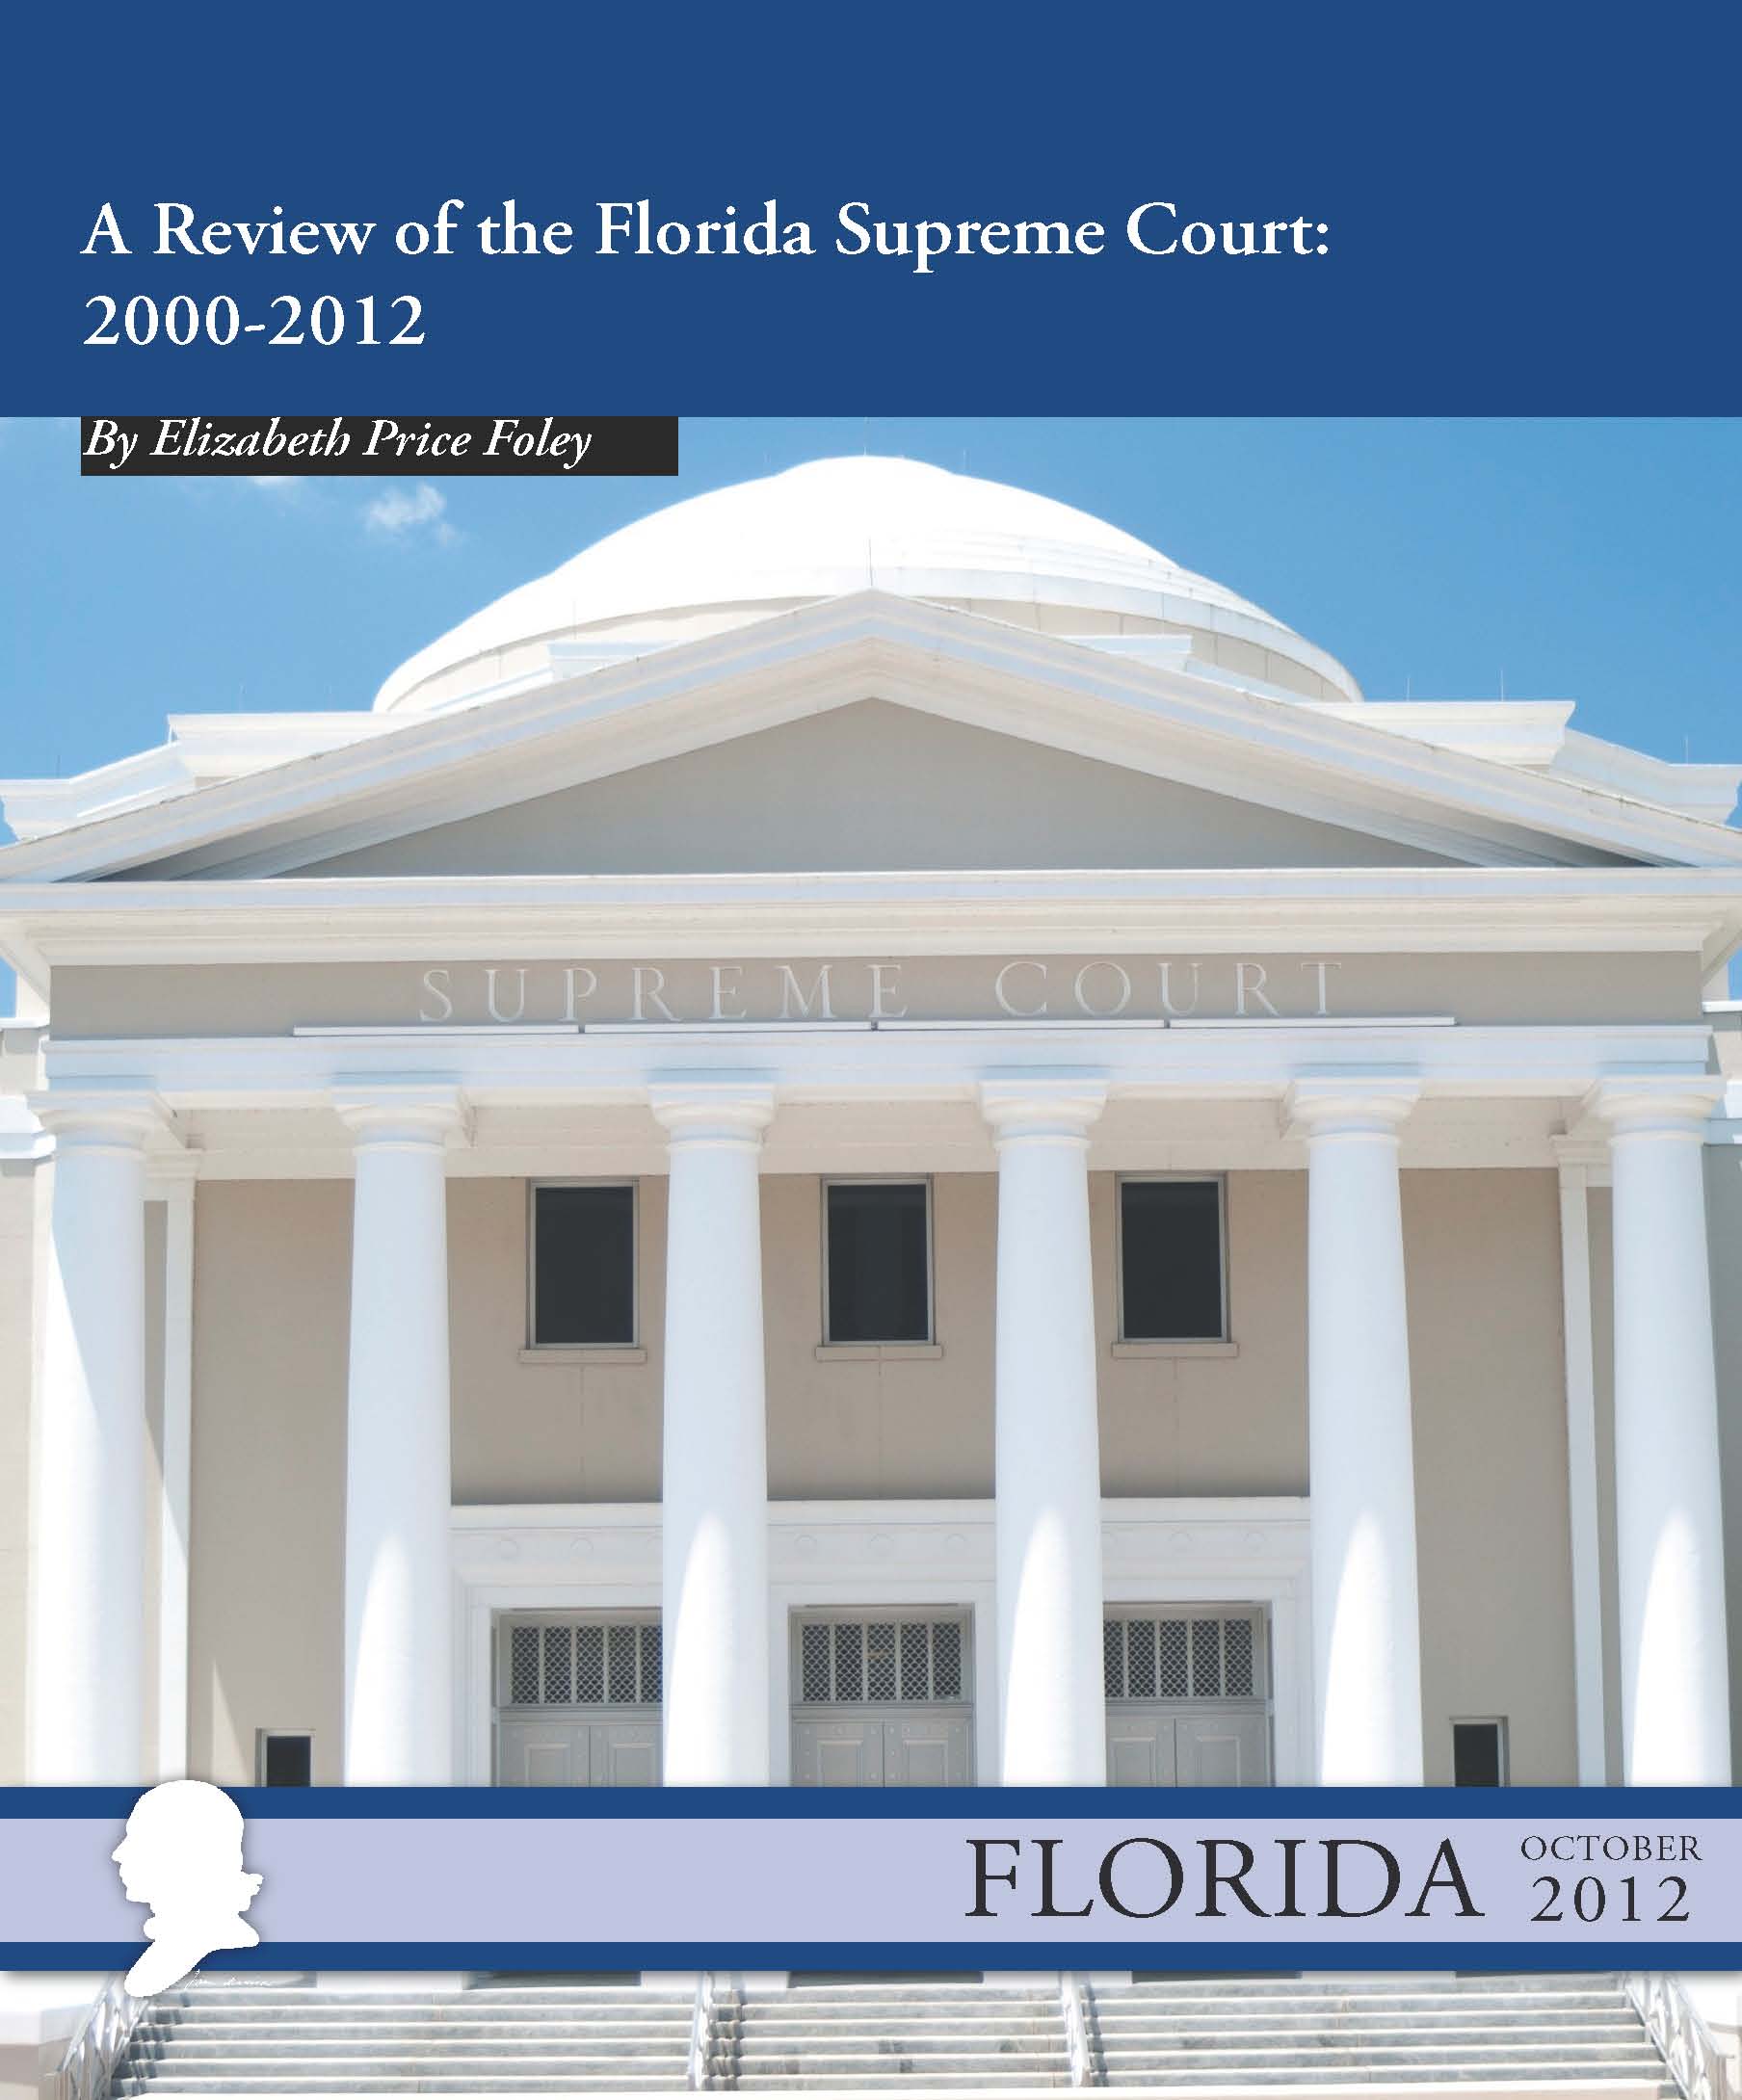 A Review of the Florida Supreme Court: 2000-2012